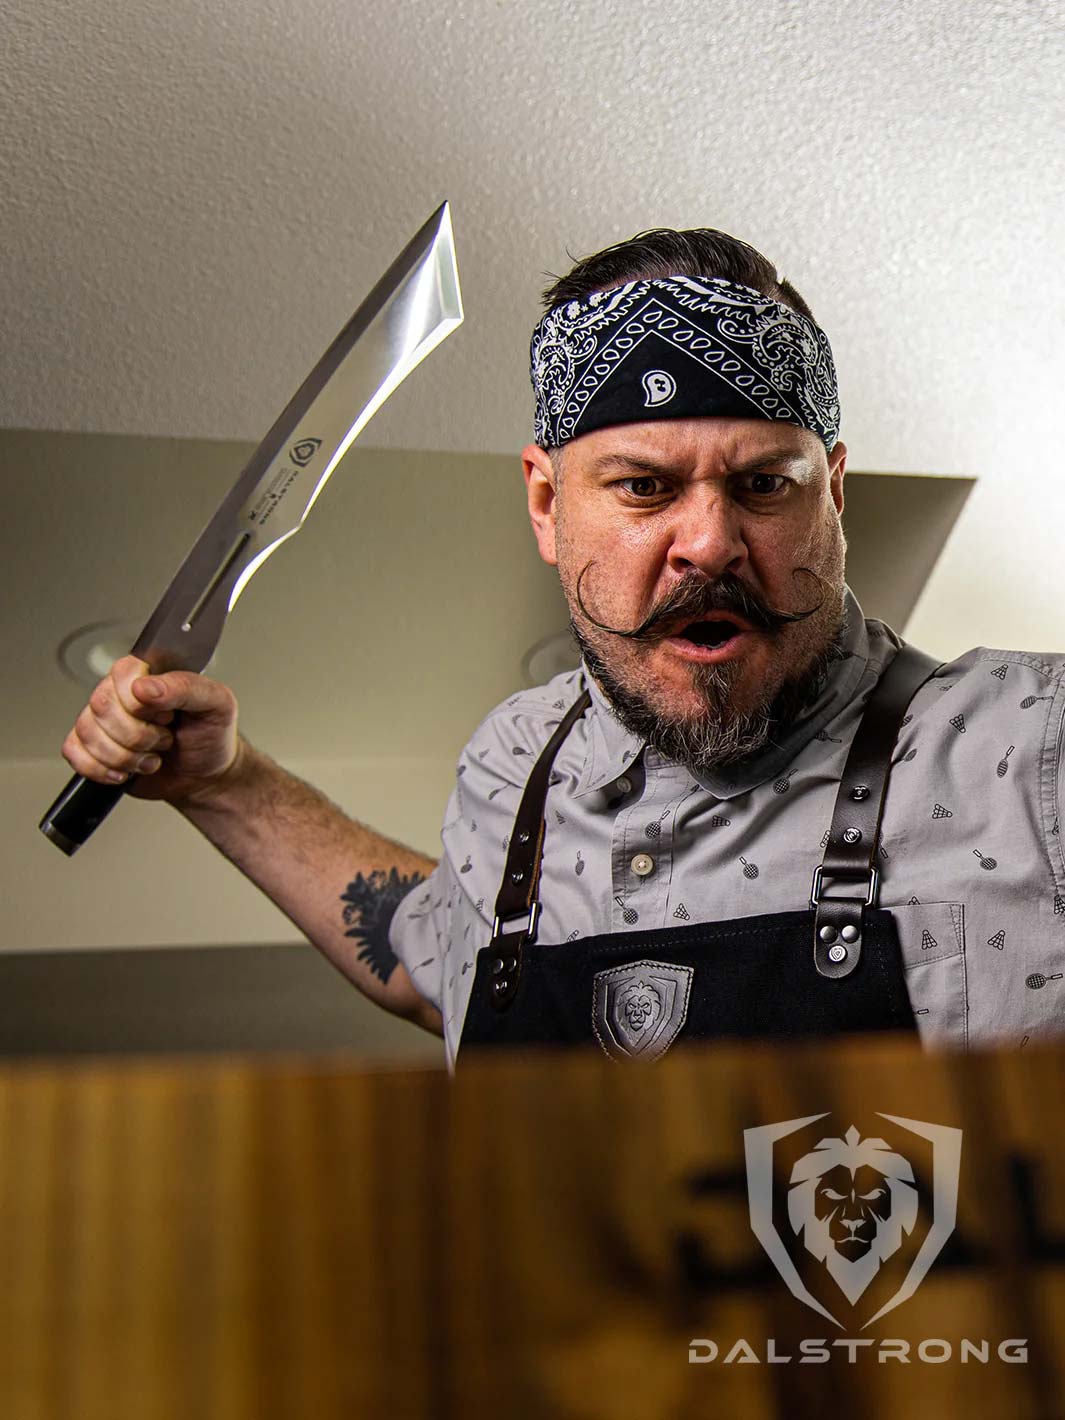 Man wearing a dalstrong kitchen apron and holding the dalstrong gladiator series 14 inch annihilator cleaver knife.